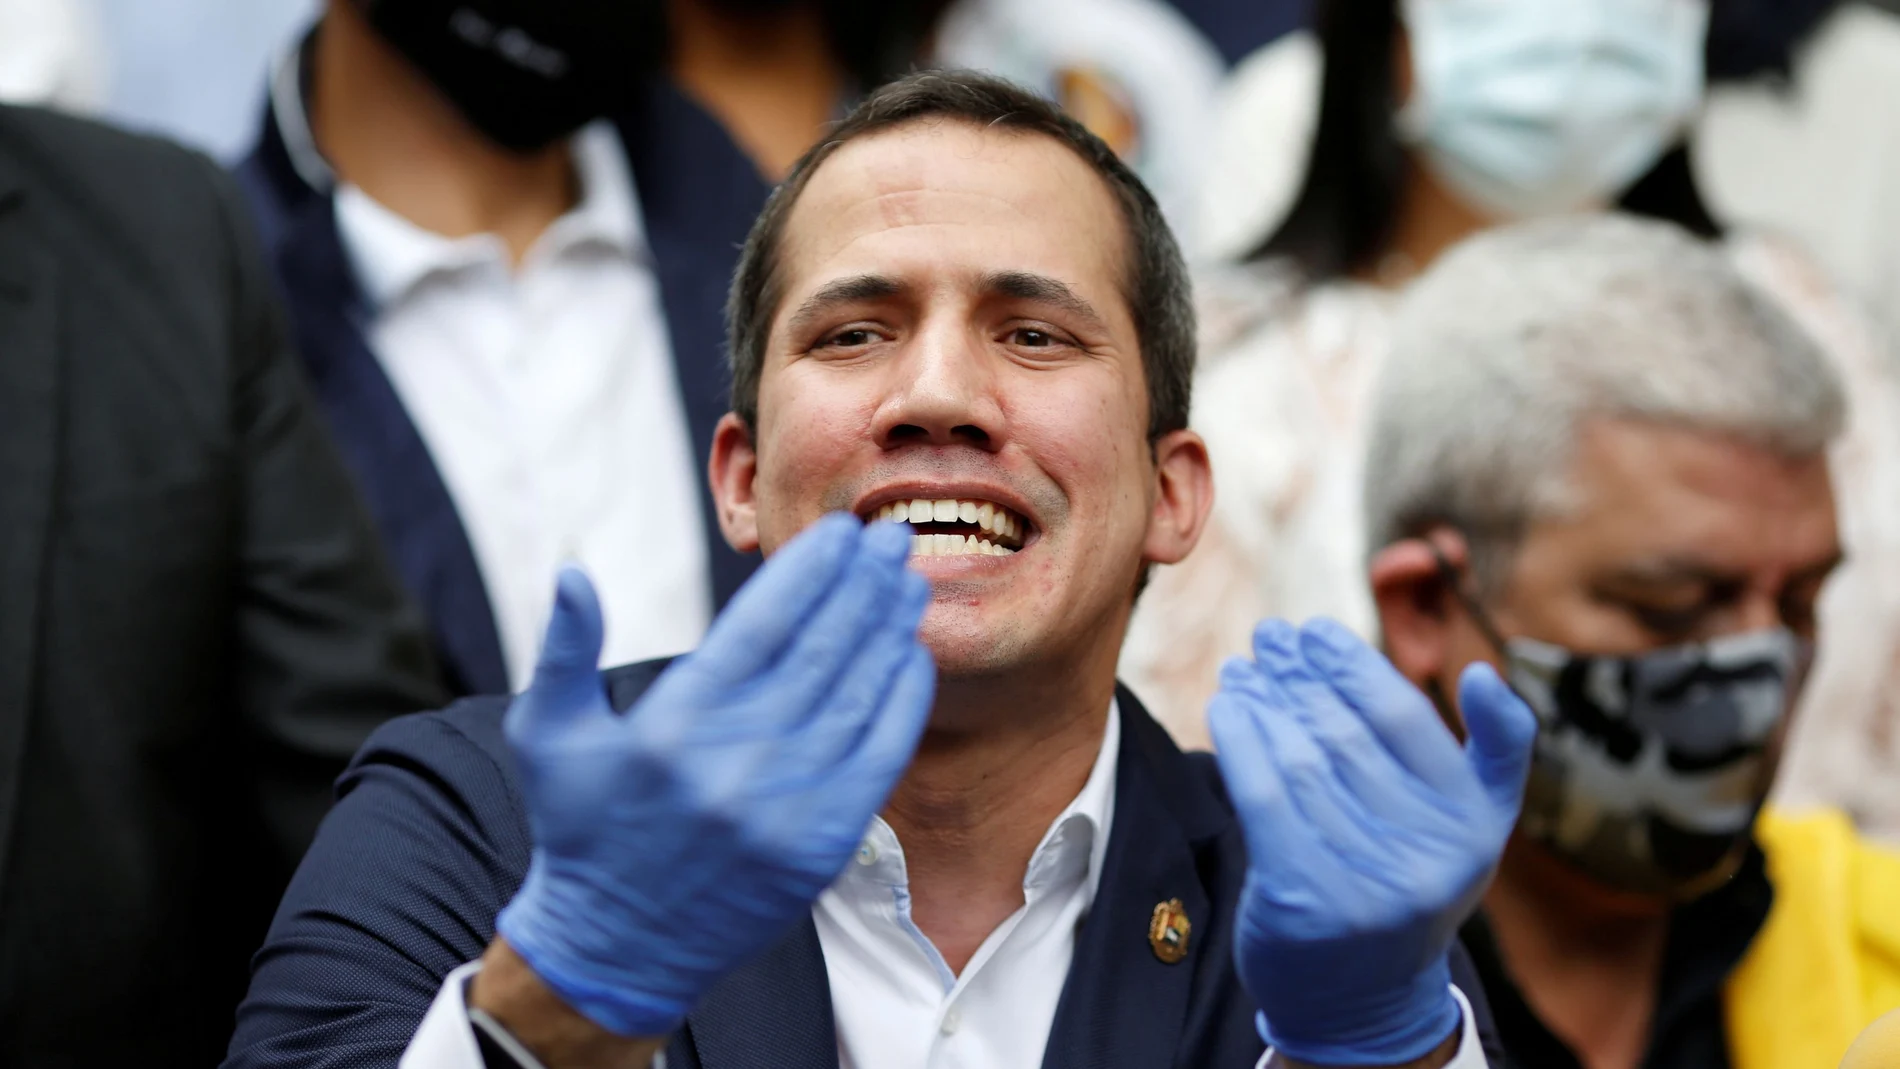 FILE PHOTO: Venezuelan opposition leader Juan Guaido speaks during a news conference after Venezuela's pro-government supreme court replaced the leaders of two key opposition parties, months ahead of legislative elections in Caracas